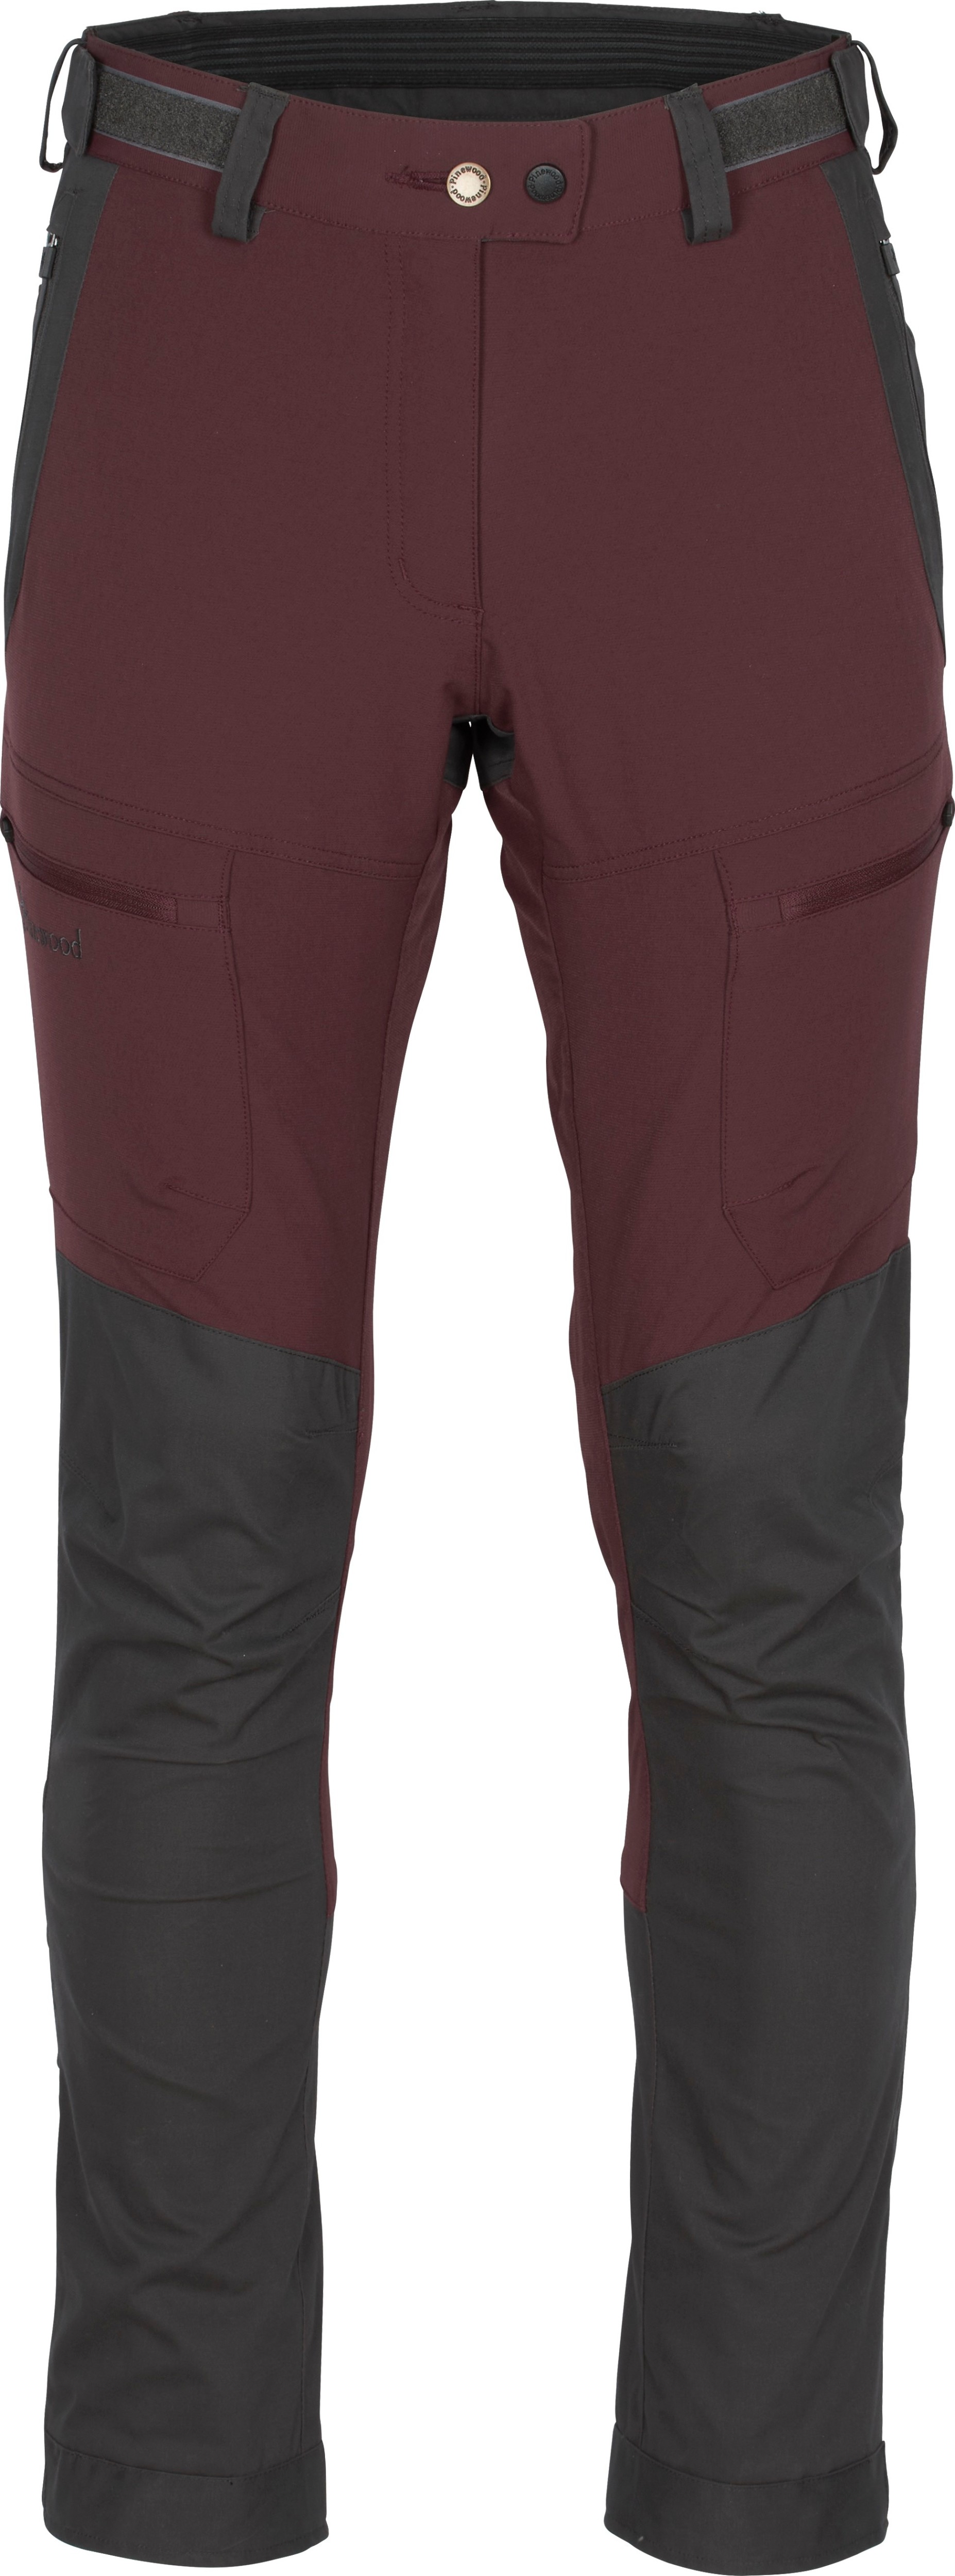 Pinewood Women's Finnveden Hybrid Extreme Trousers Earthplum/D.Anthraci 42, Earth Plum/Dark Anthracite